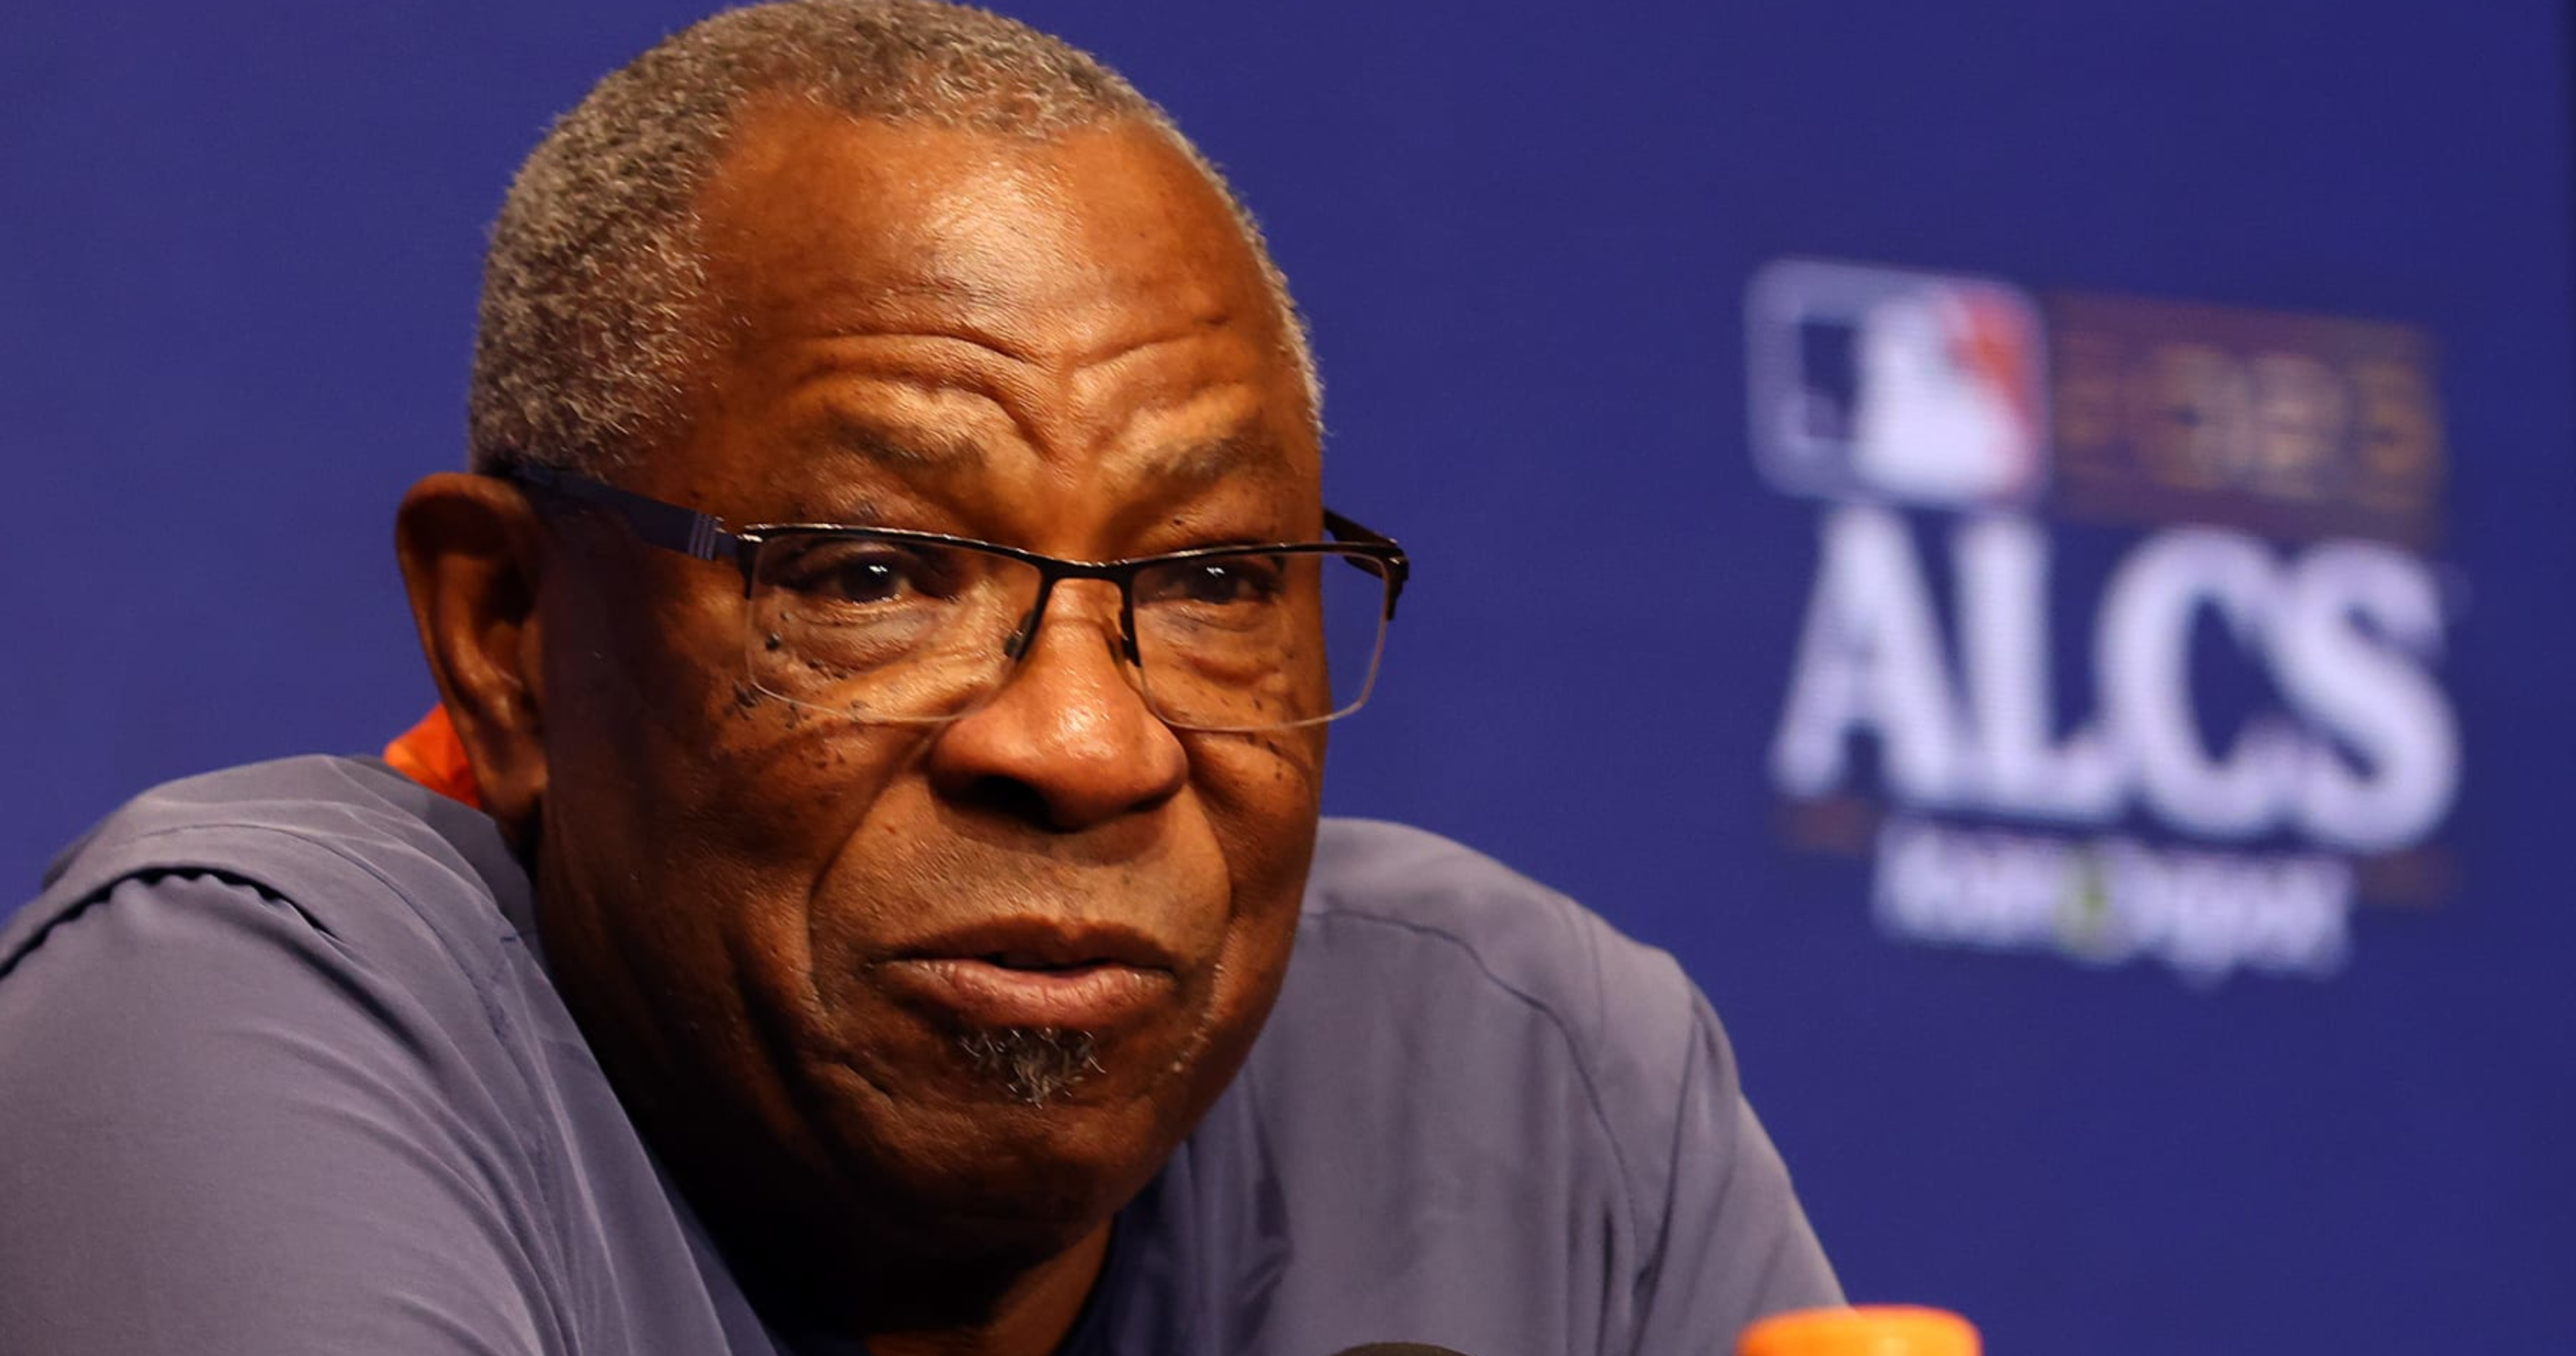 MLB Rumors: Could Astros demise lead to Dusty Baker reunion?